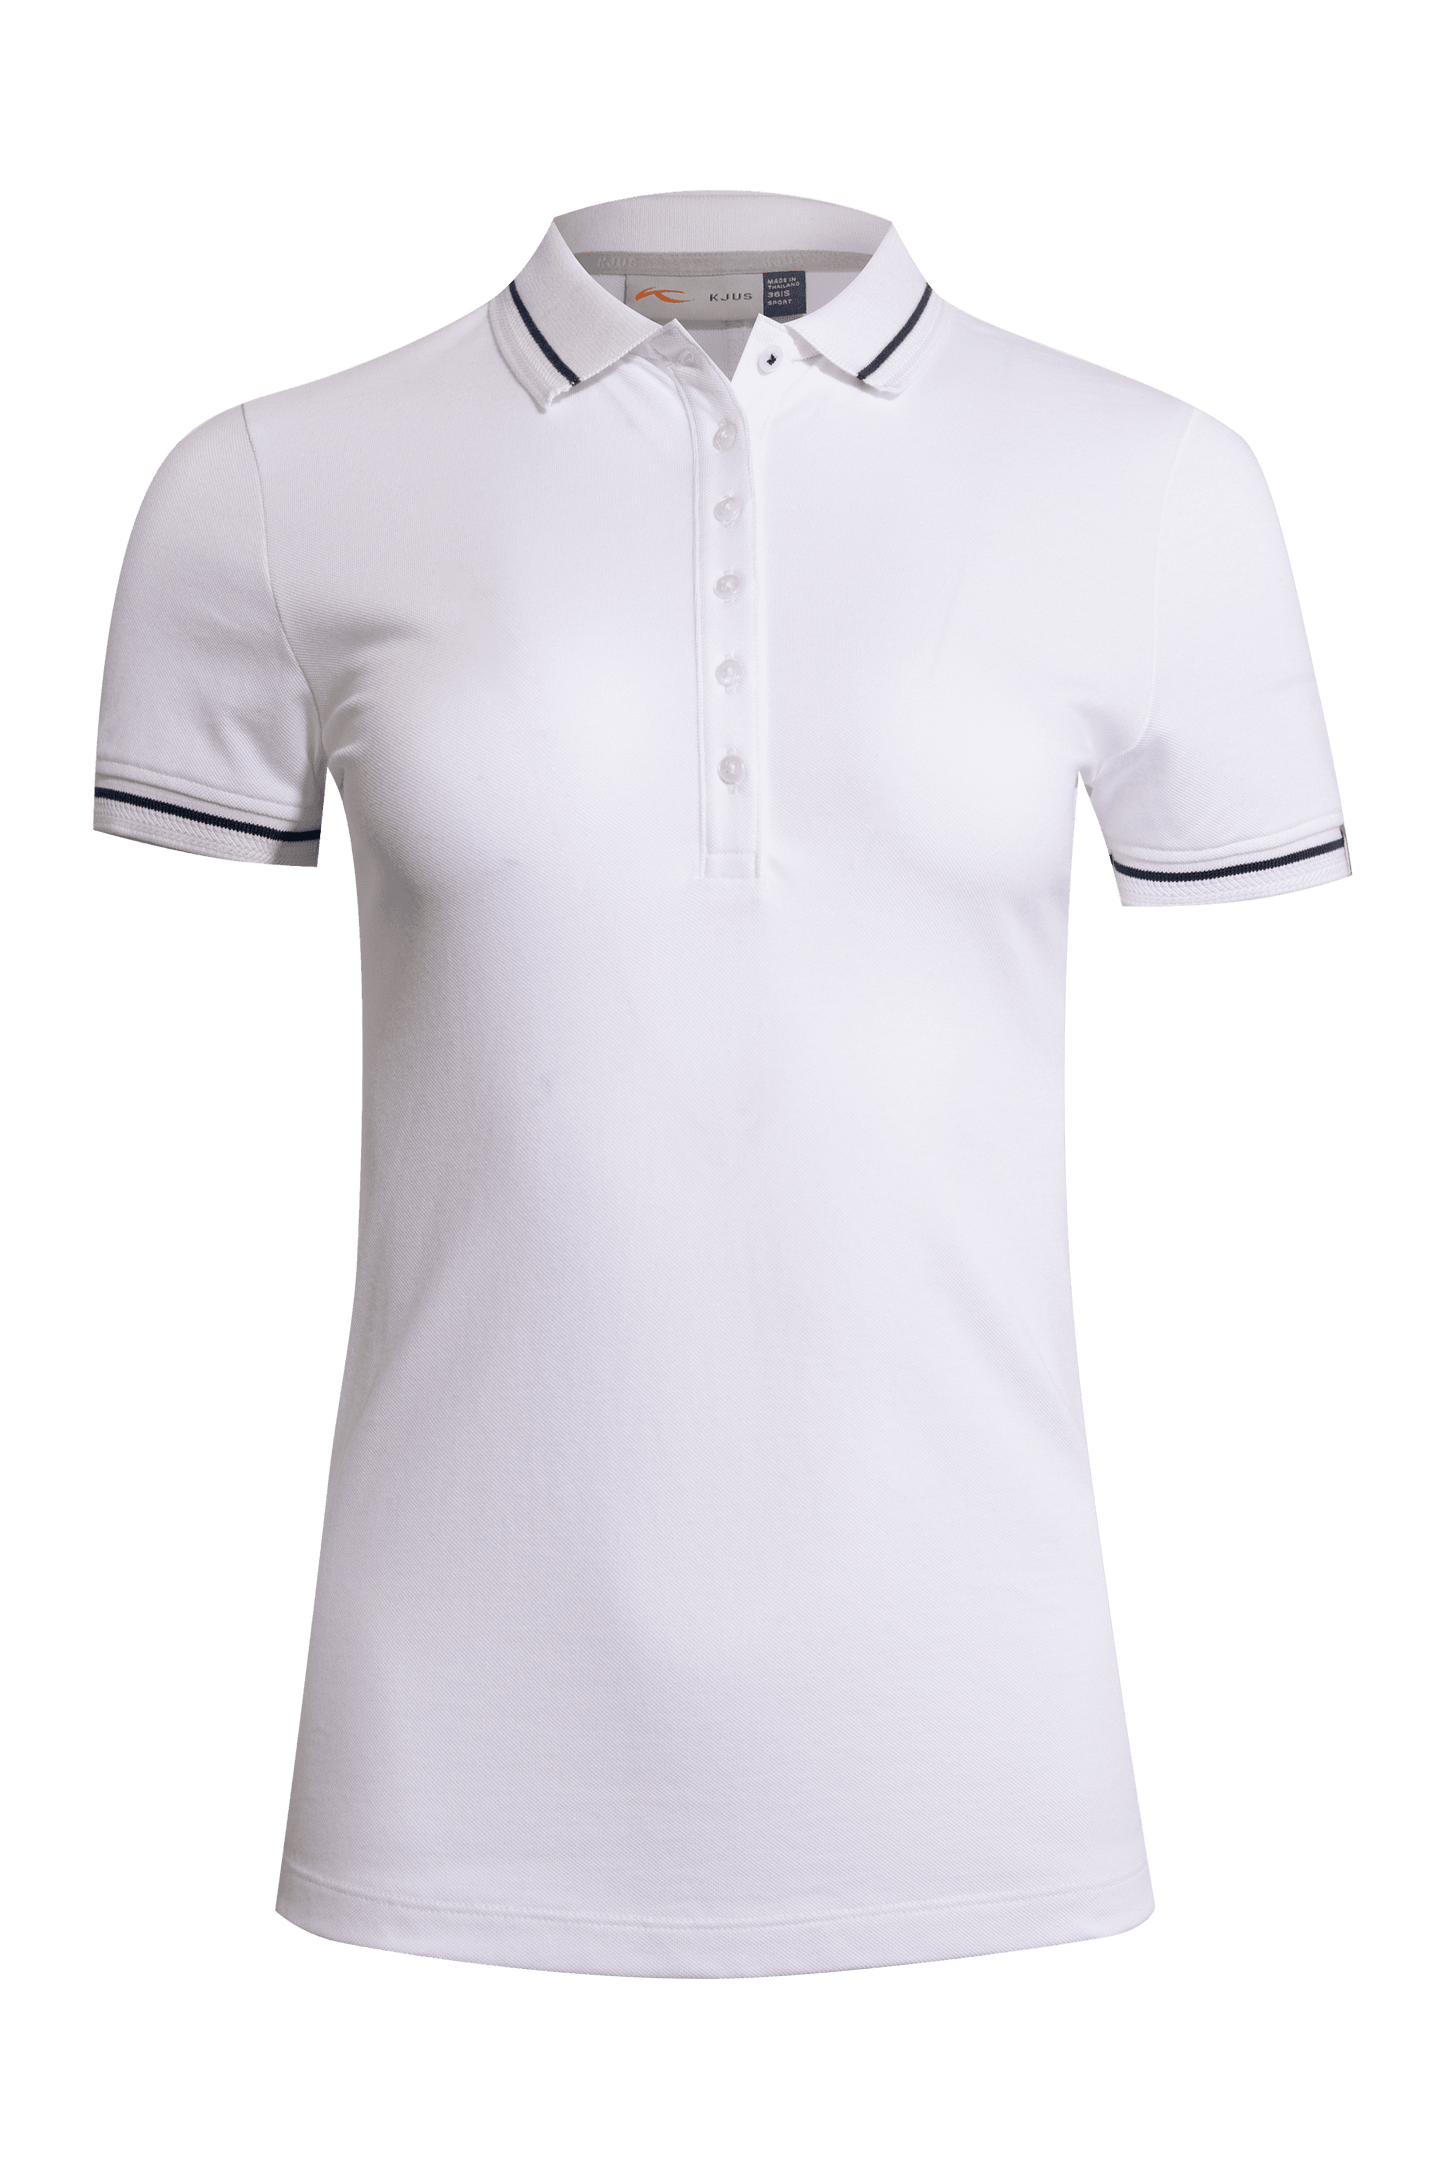 Women's Sanna Polo by Kjus - The Luxury Promotional Gifts Company Limited